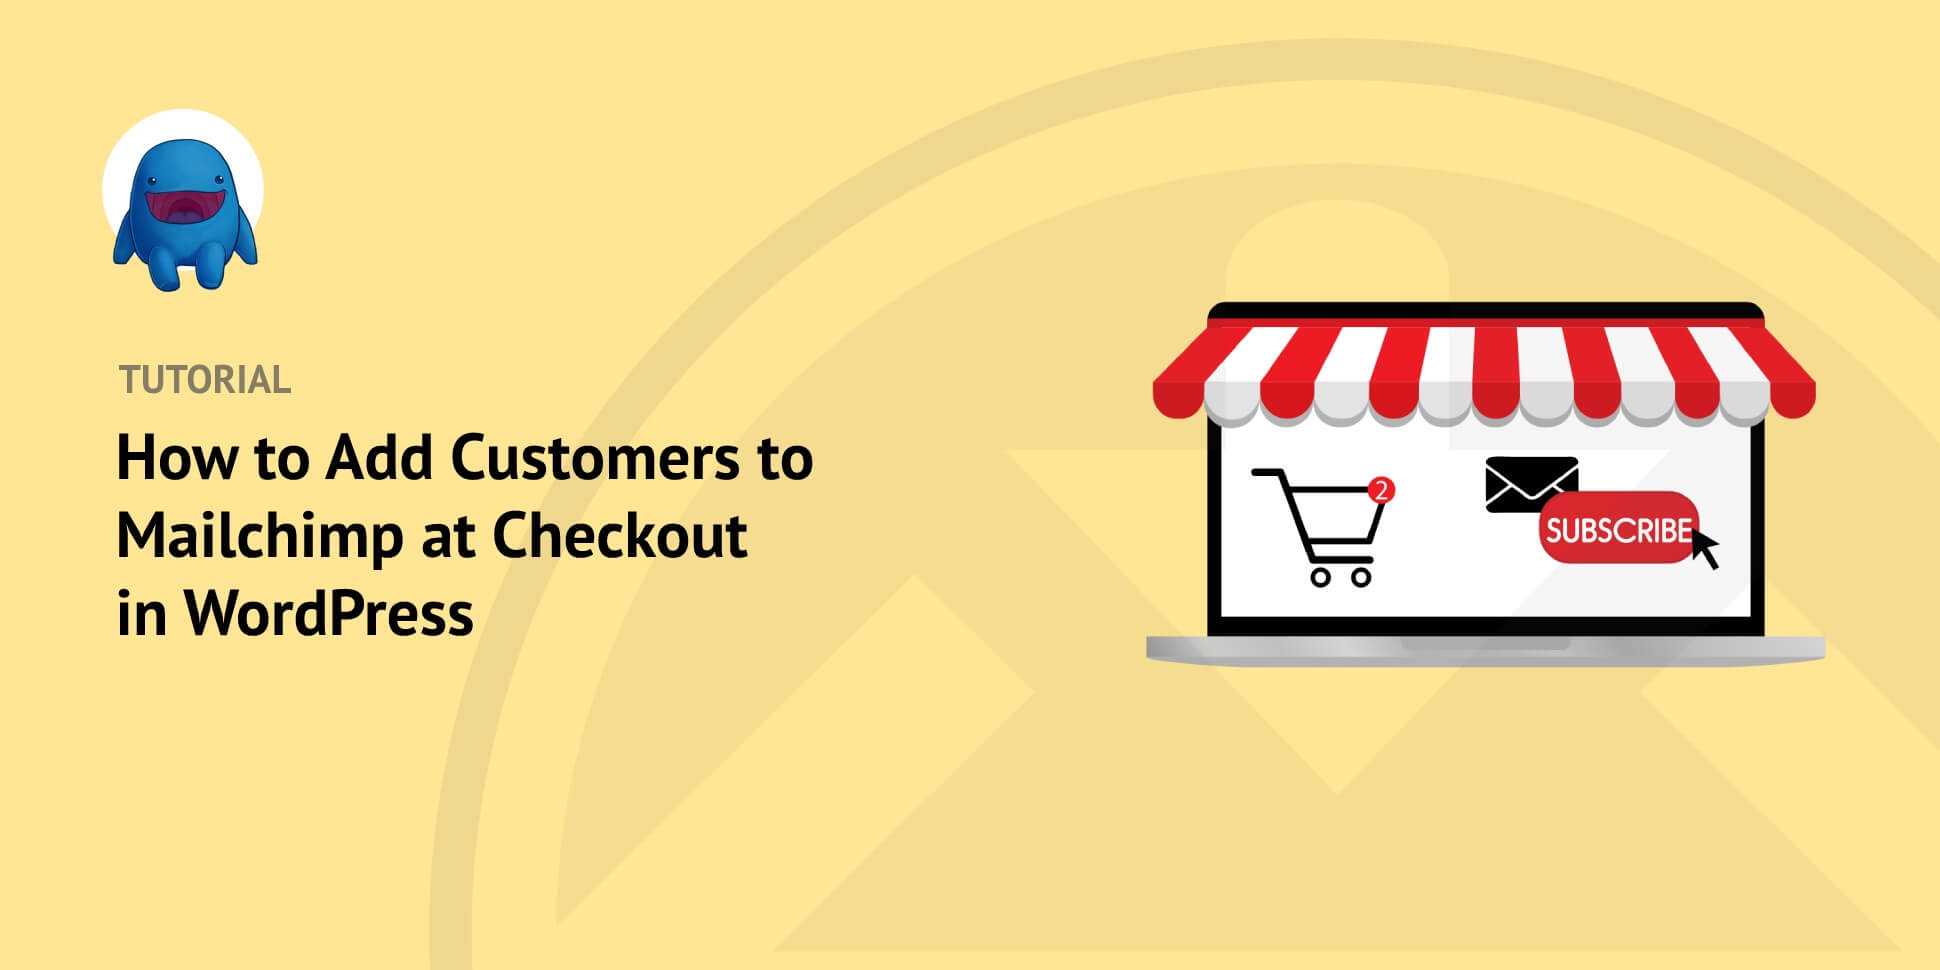 How to Add Customers to Mailchimp at Checkout in WordPress